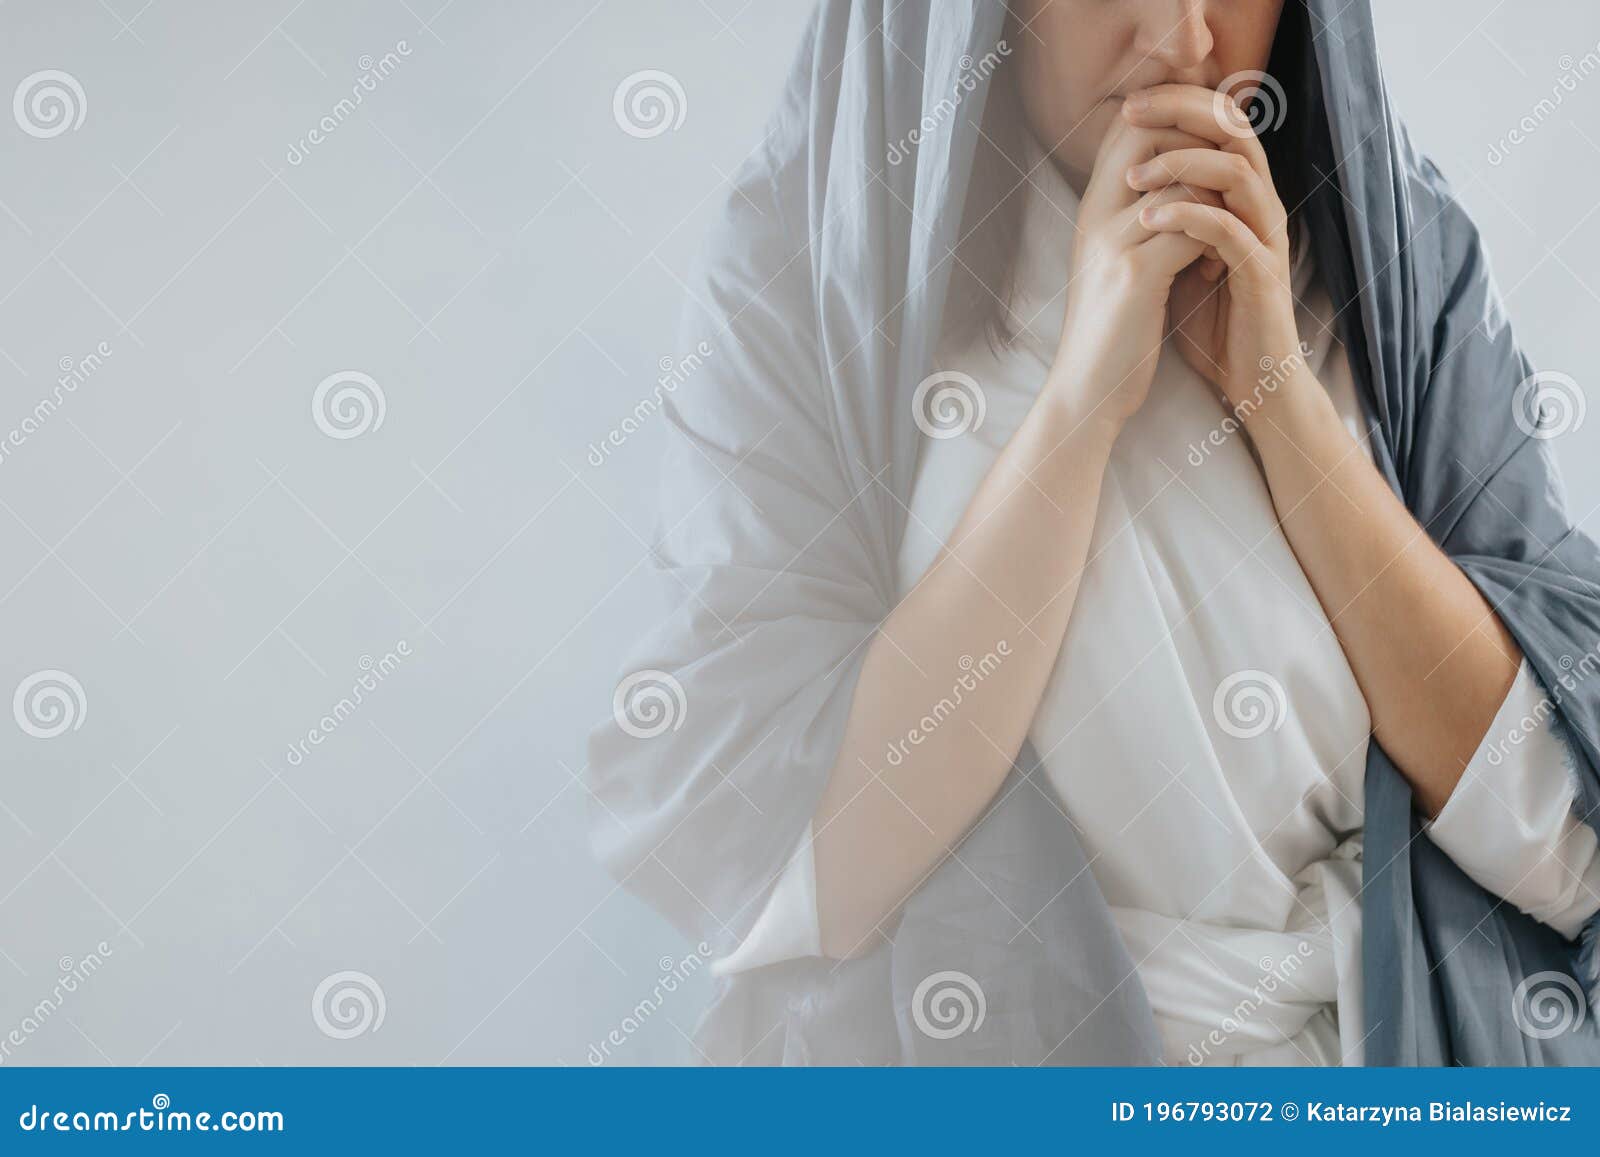 mother mary praying